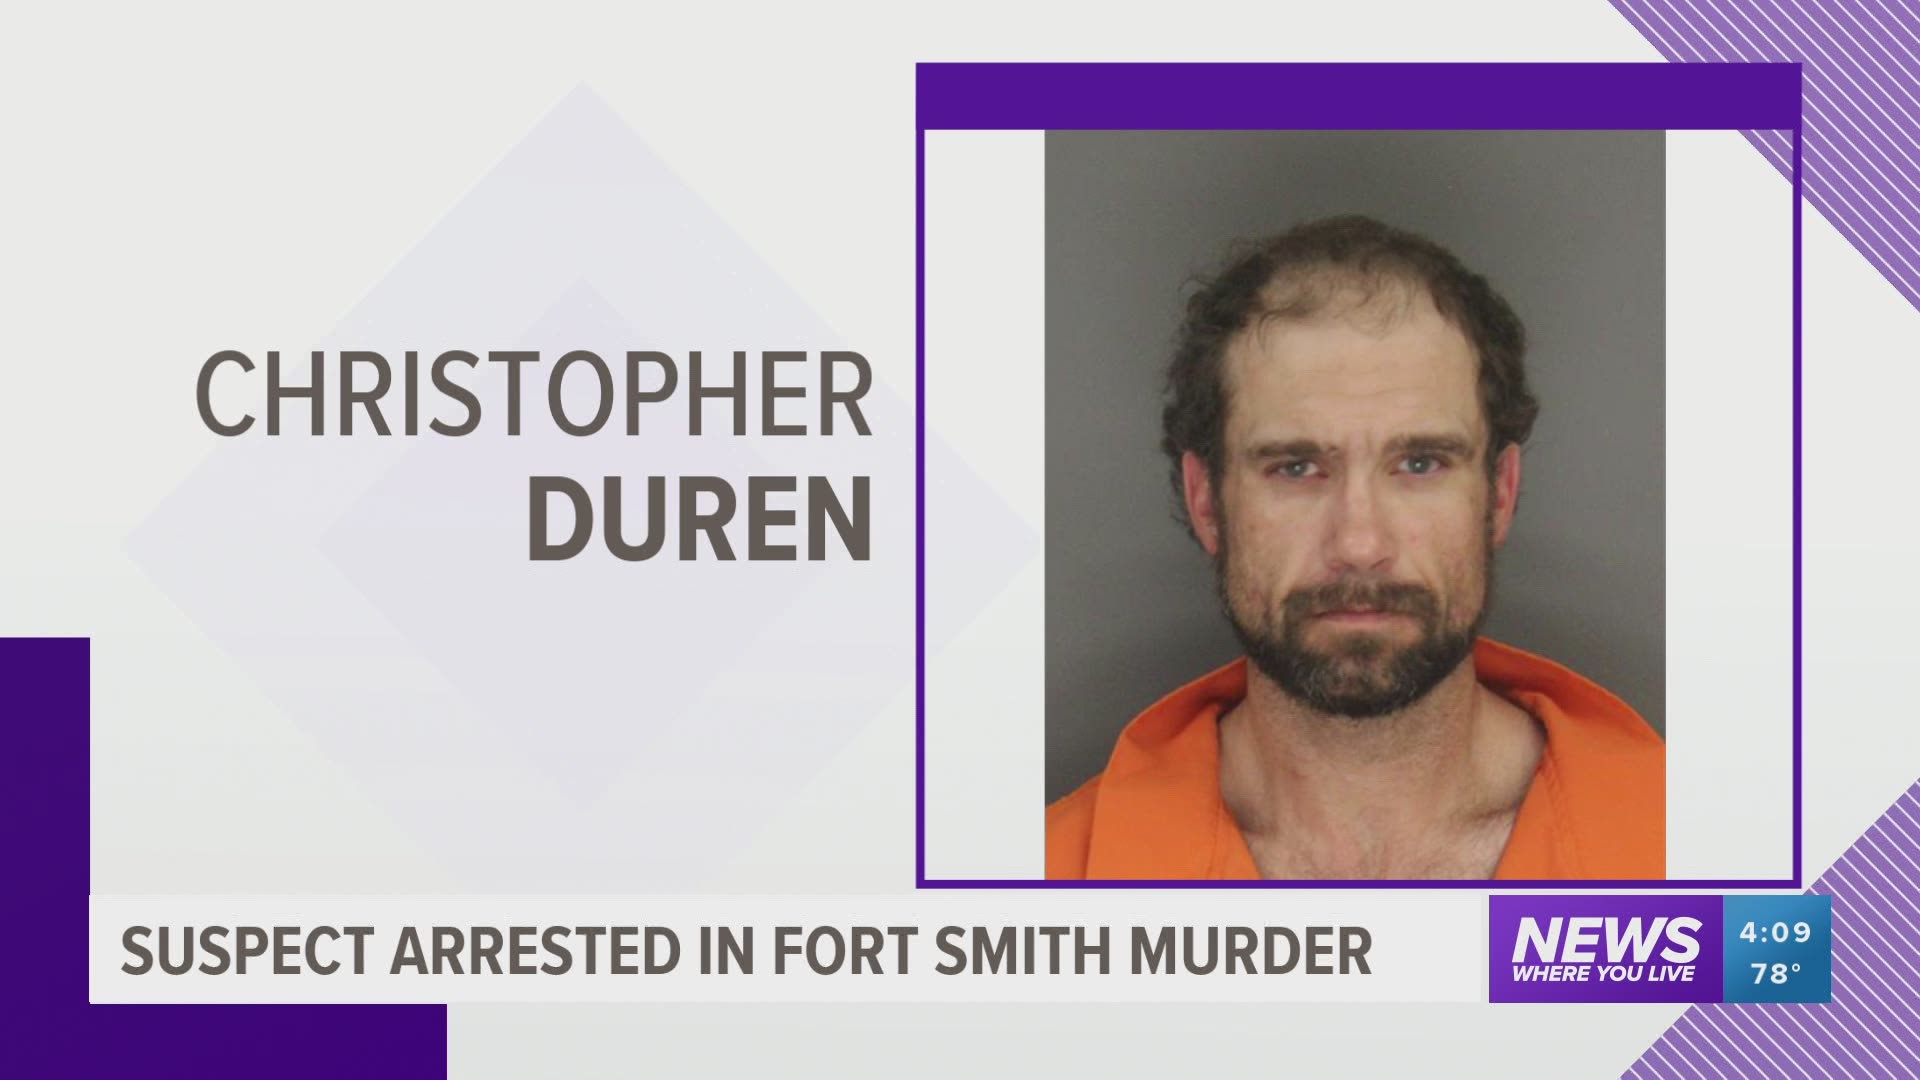 suspect arrested in Fort Smith murder.